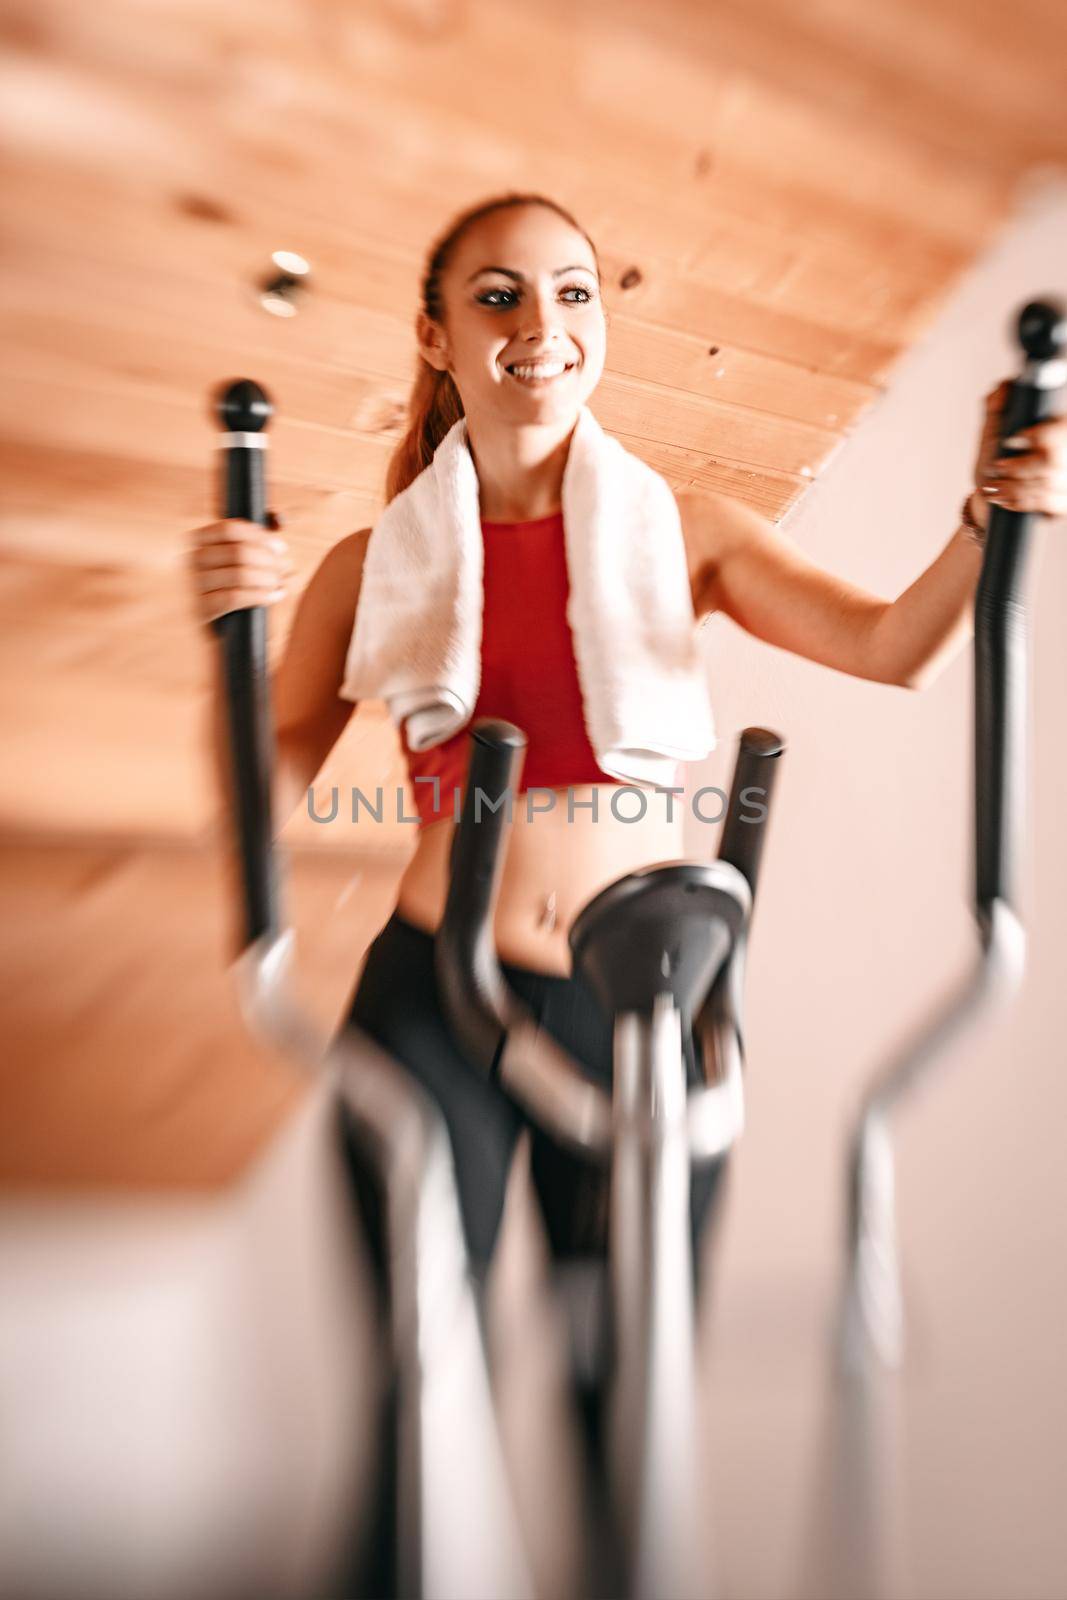 Beautiful young woman exercising on stepper at home.